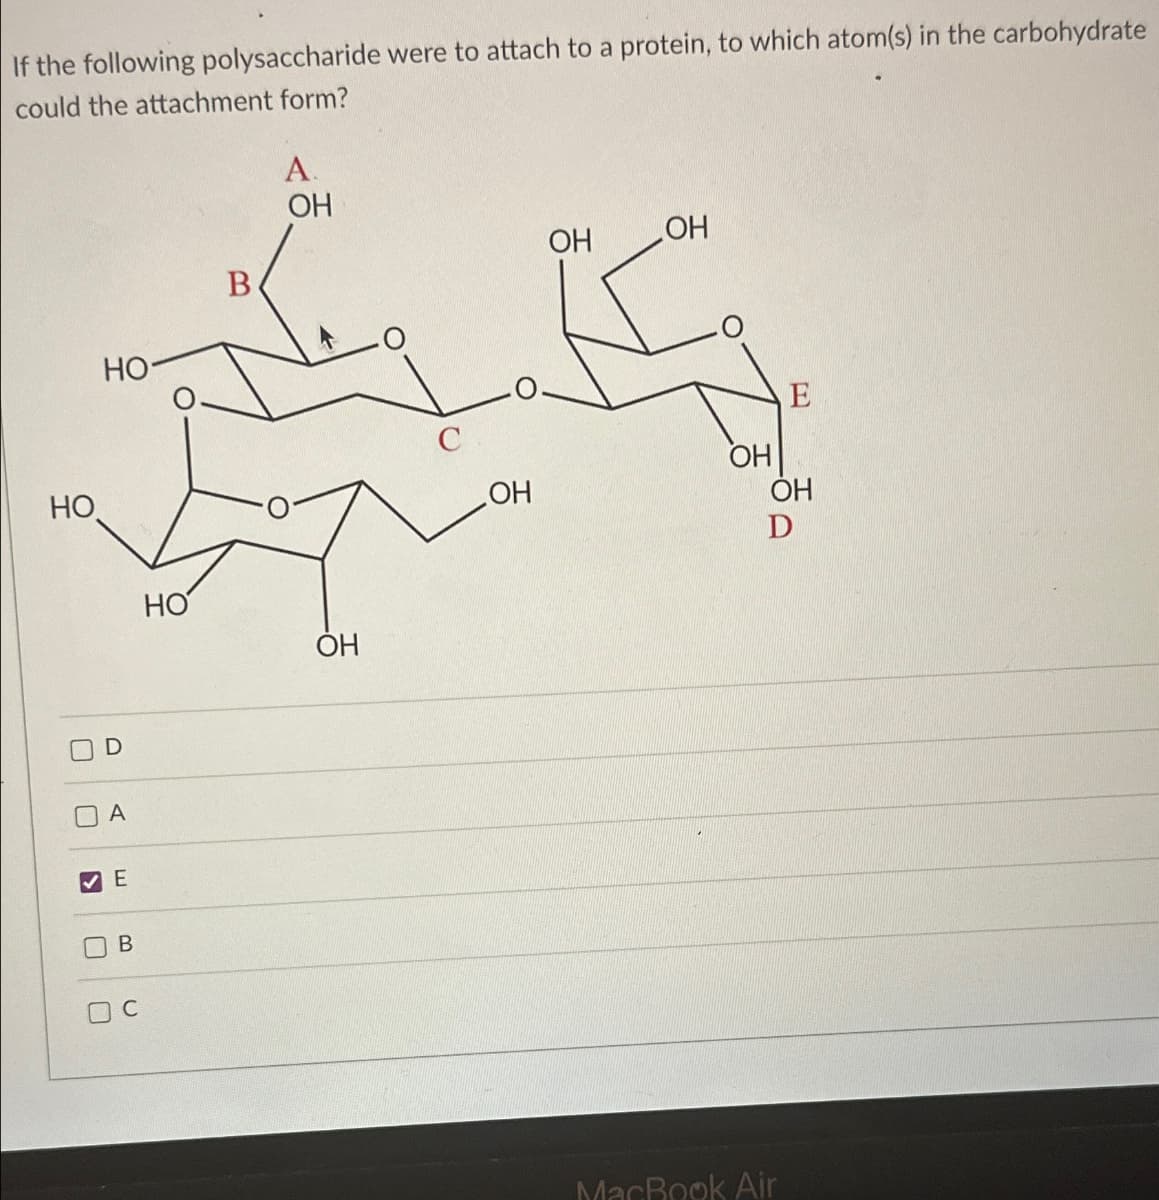 If the following polysaccharide were to attach to a protein, to which atom(s) in the carbohydrate
could the attachment form?
HO
U
☐
☐
☑
D
A
E
HO
B
B
C
A
OH
OH
OH
HO
OH
E
OH
OH
D
وة
OH
MacBook Air